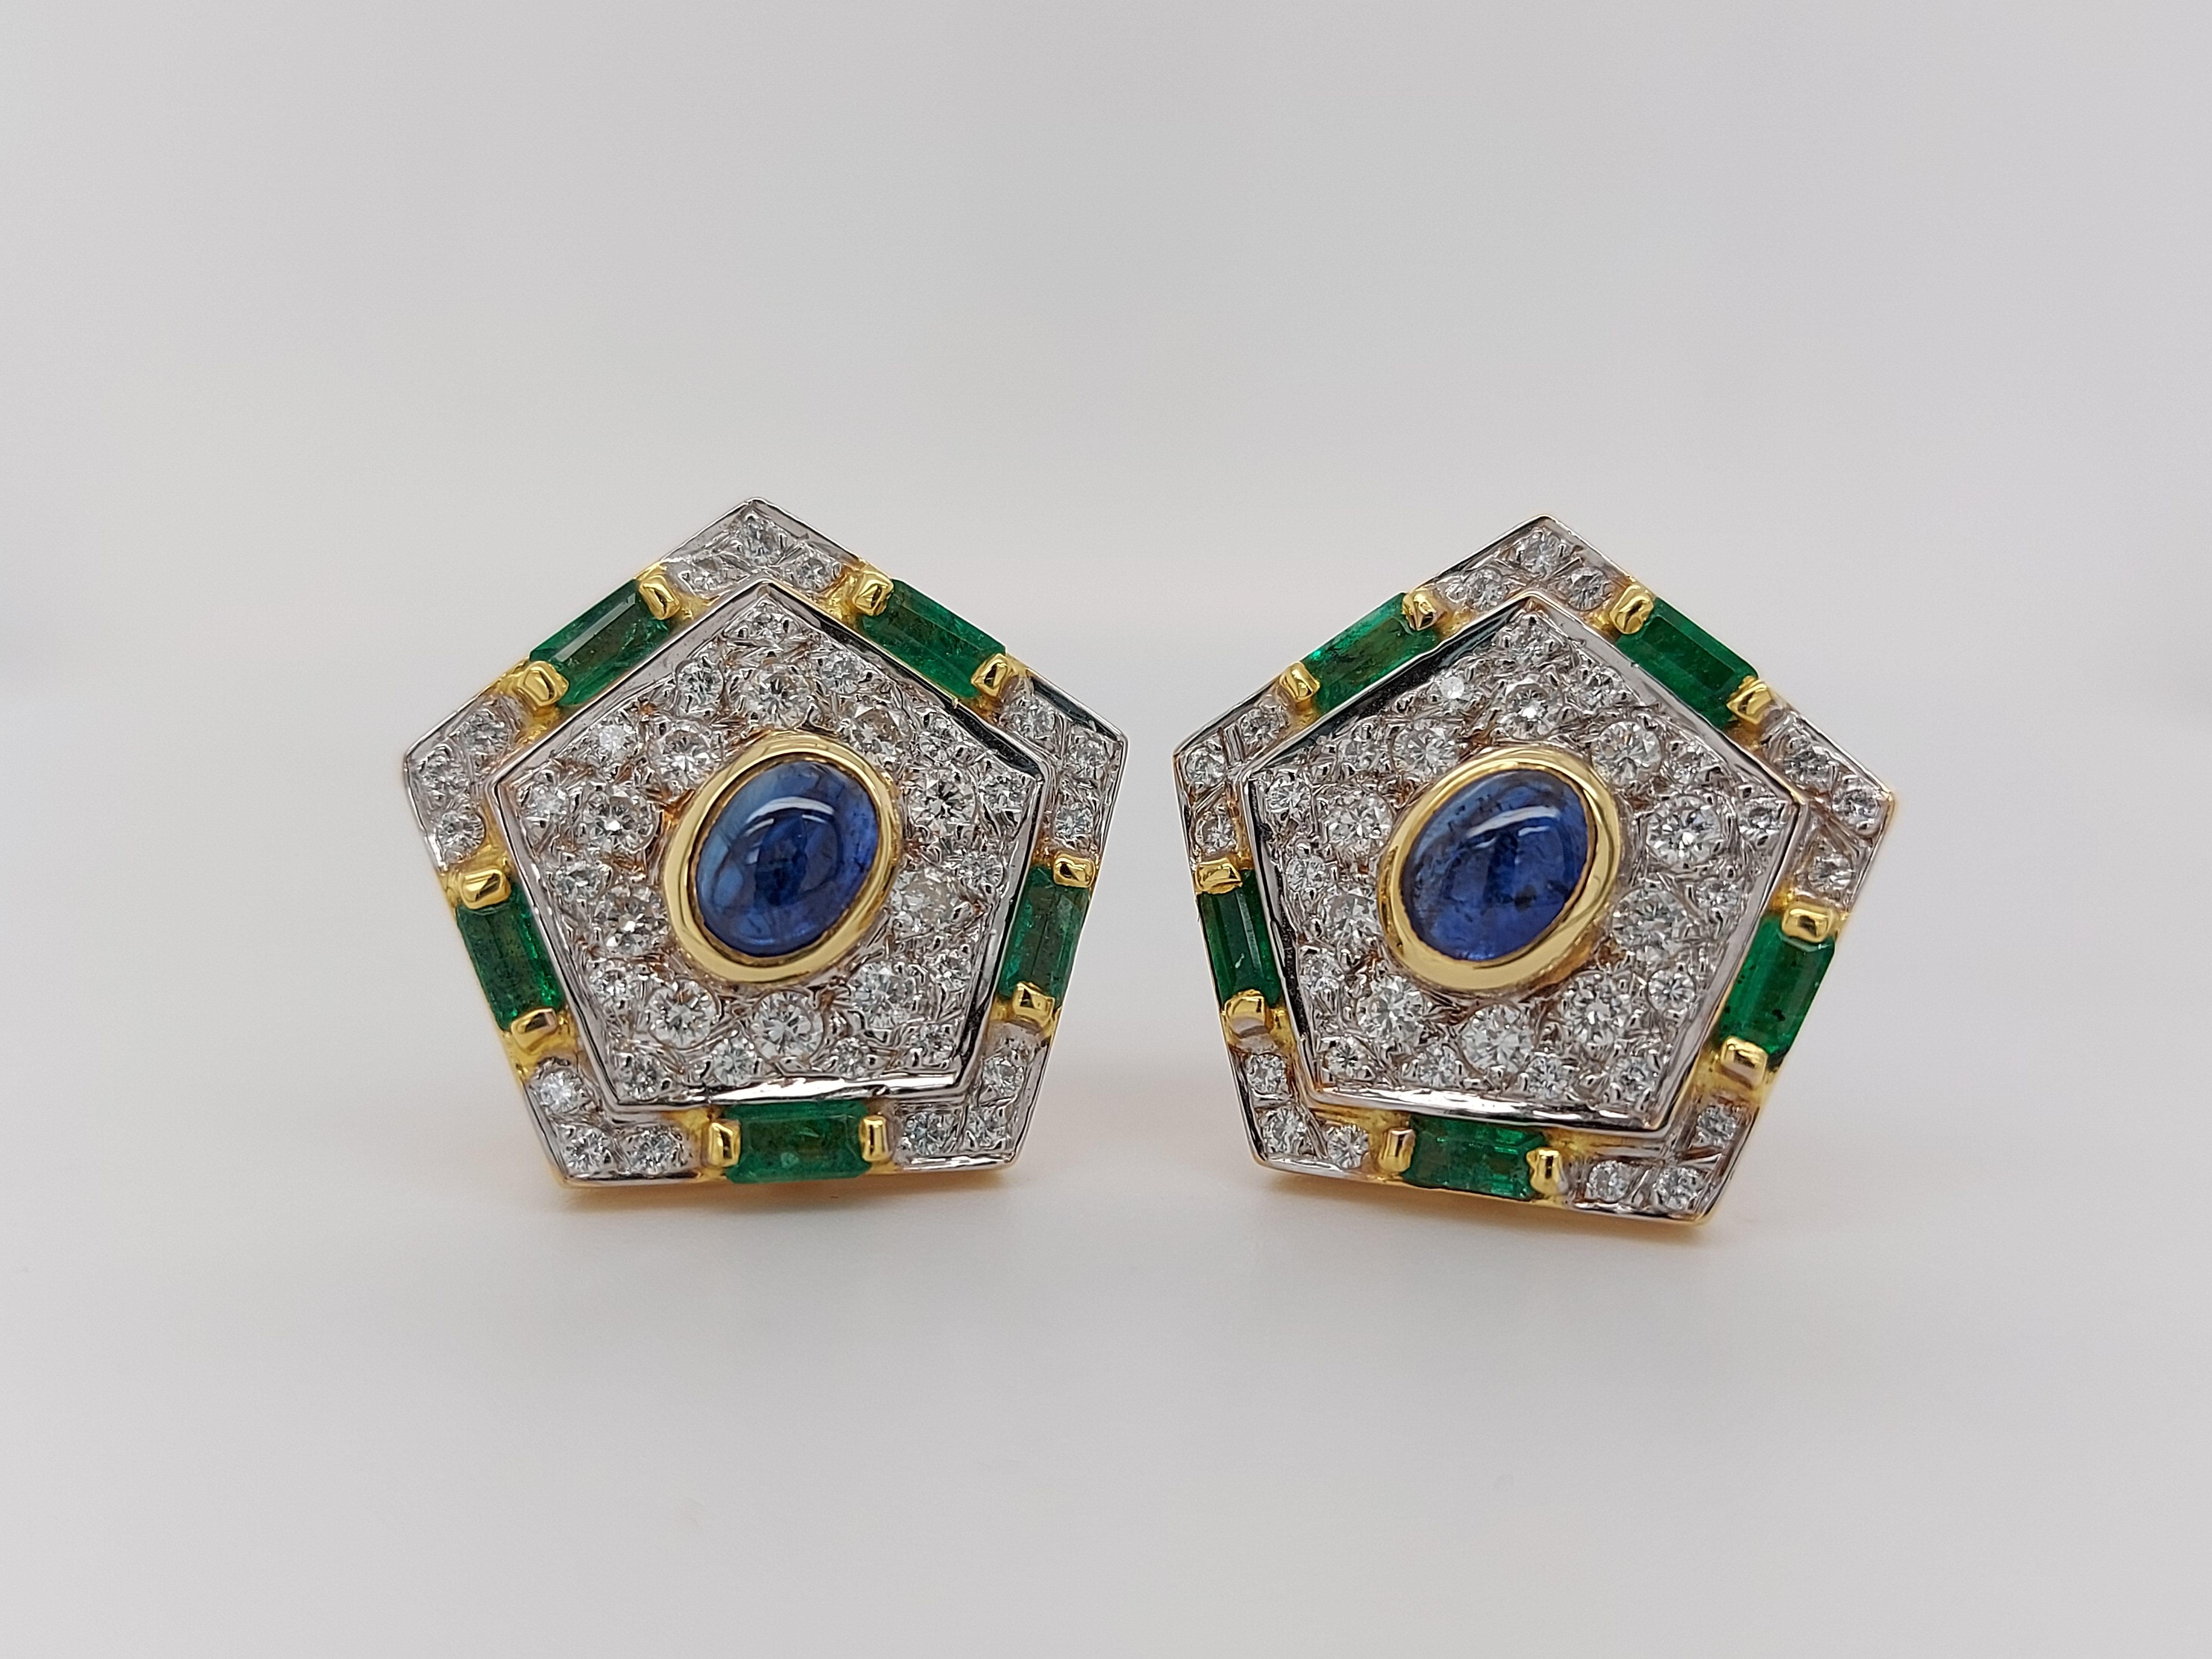 Luxurious Gold Clip-On Earrings With Diamonds, Emerald and Cabochon Sapphire For Sale 5